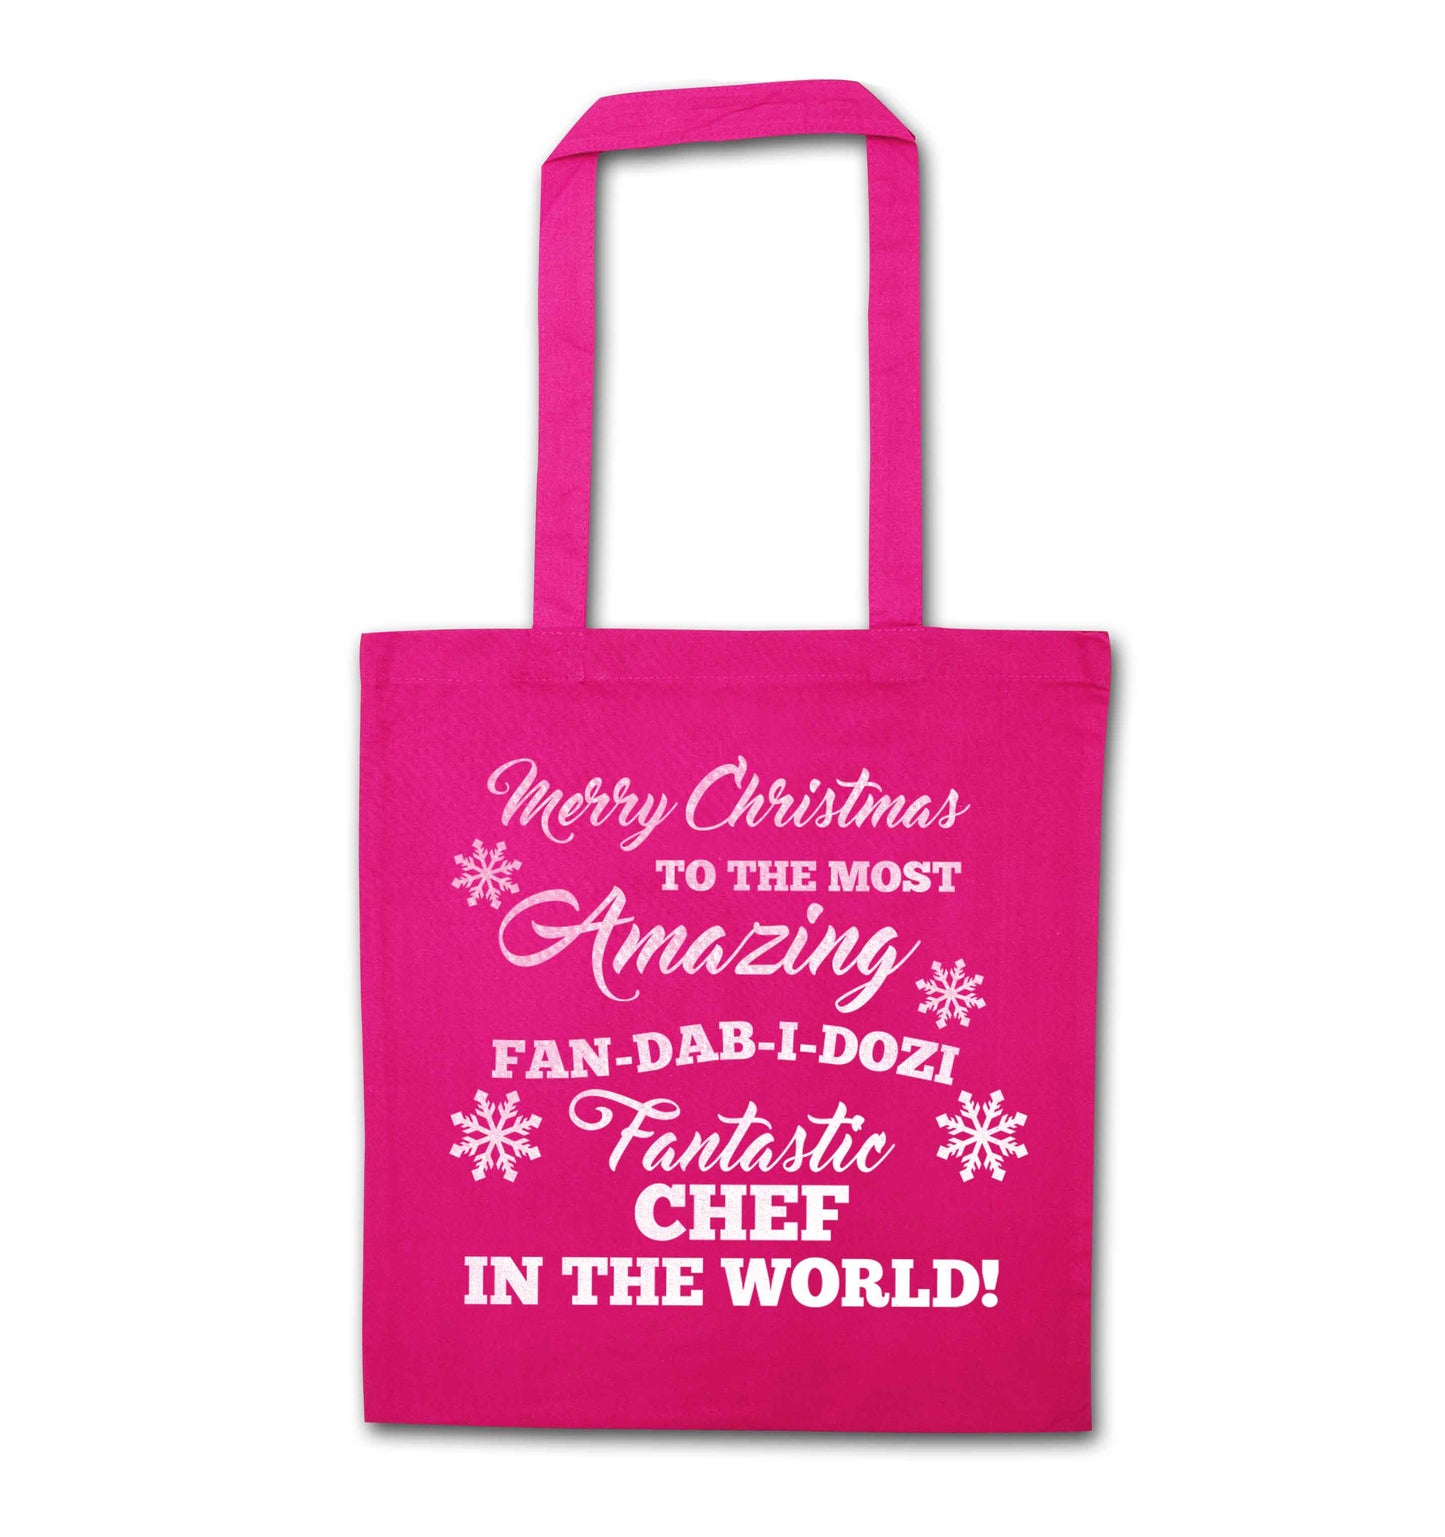 Merry Christmas to the most amazing fan-dab-i-dozi fantasic chef in the world pink tote bag